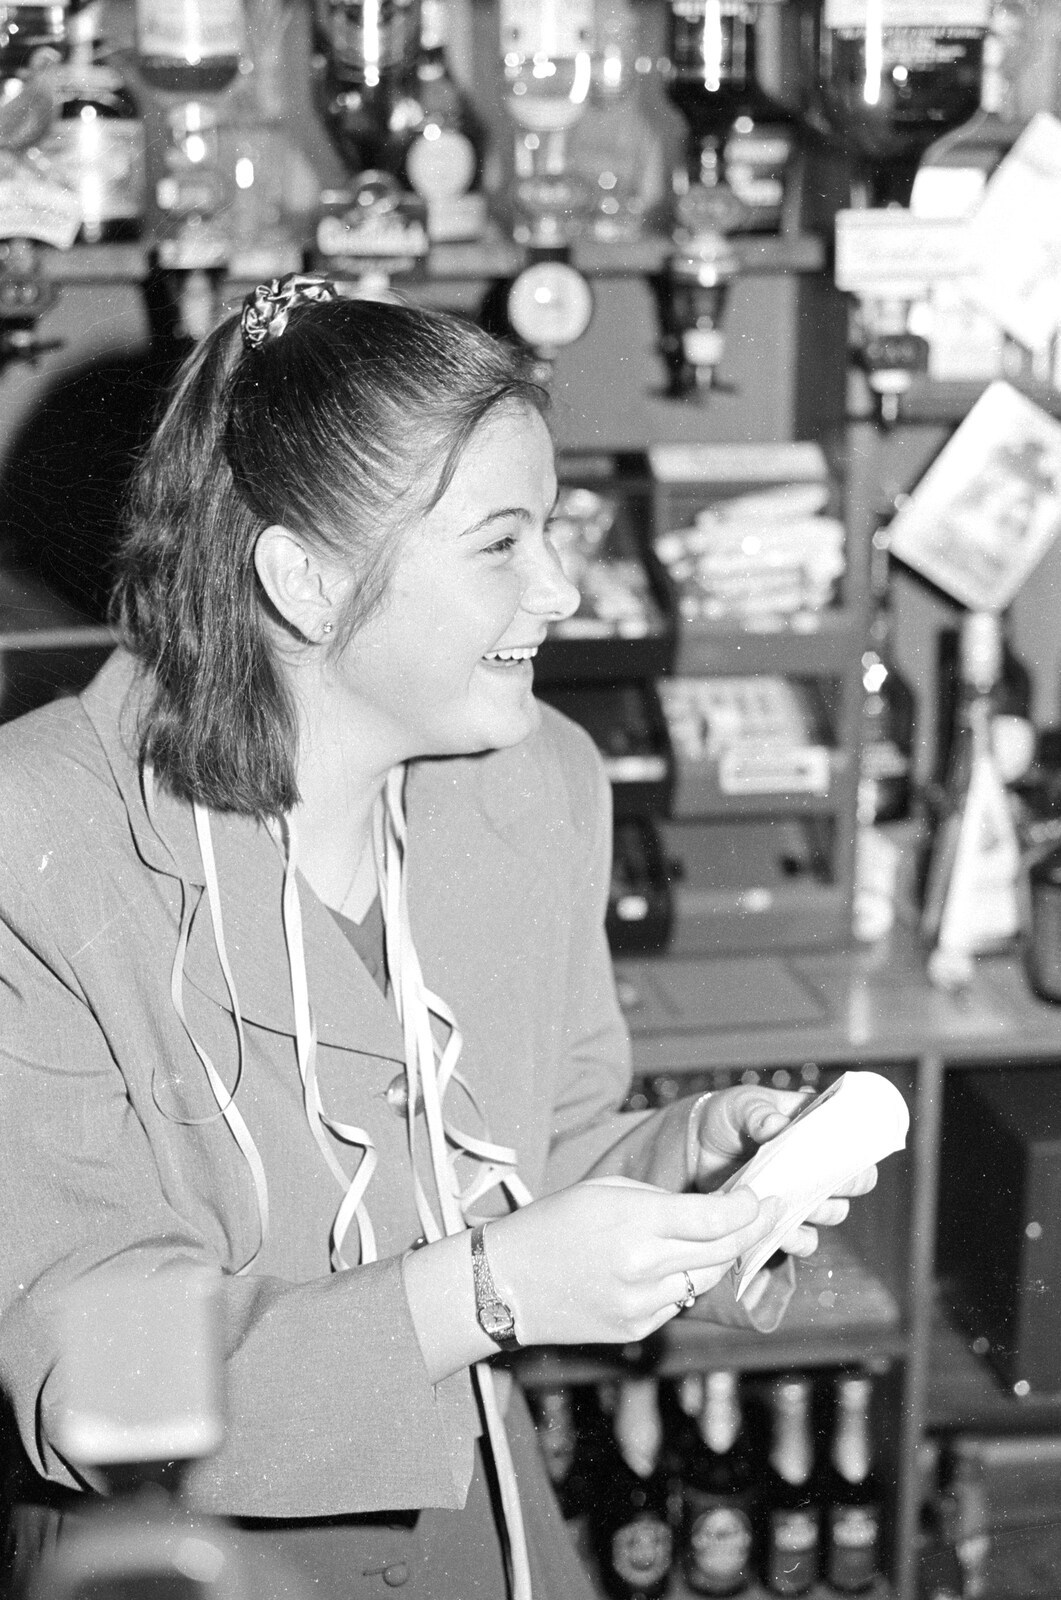 Claire has a giggle from New Year's Eve at the Swan Inn, Brome, Suffolk - 31st December 1992